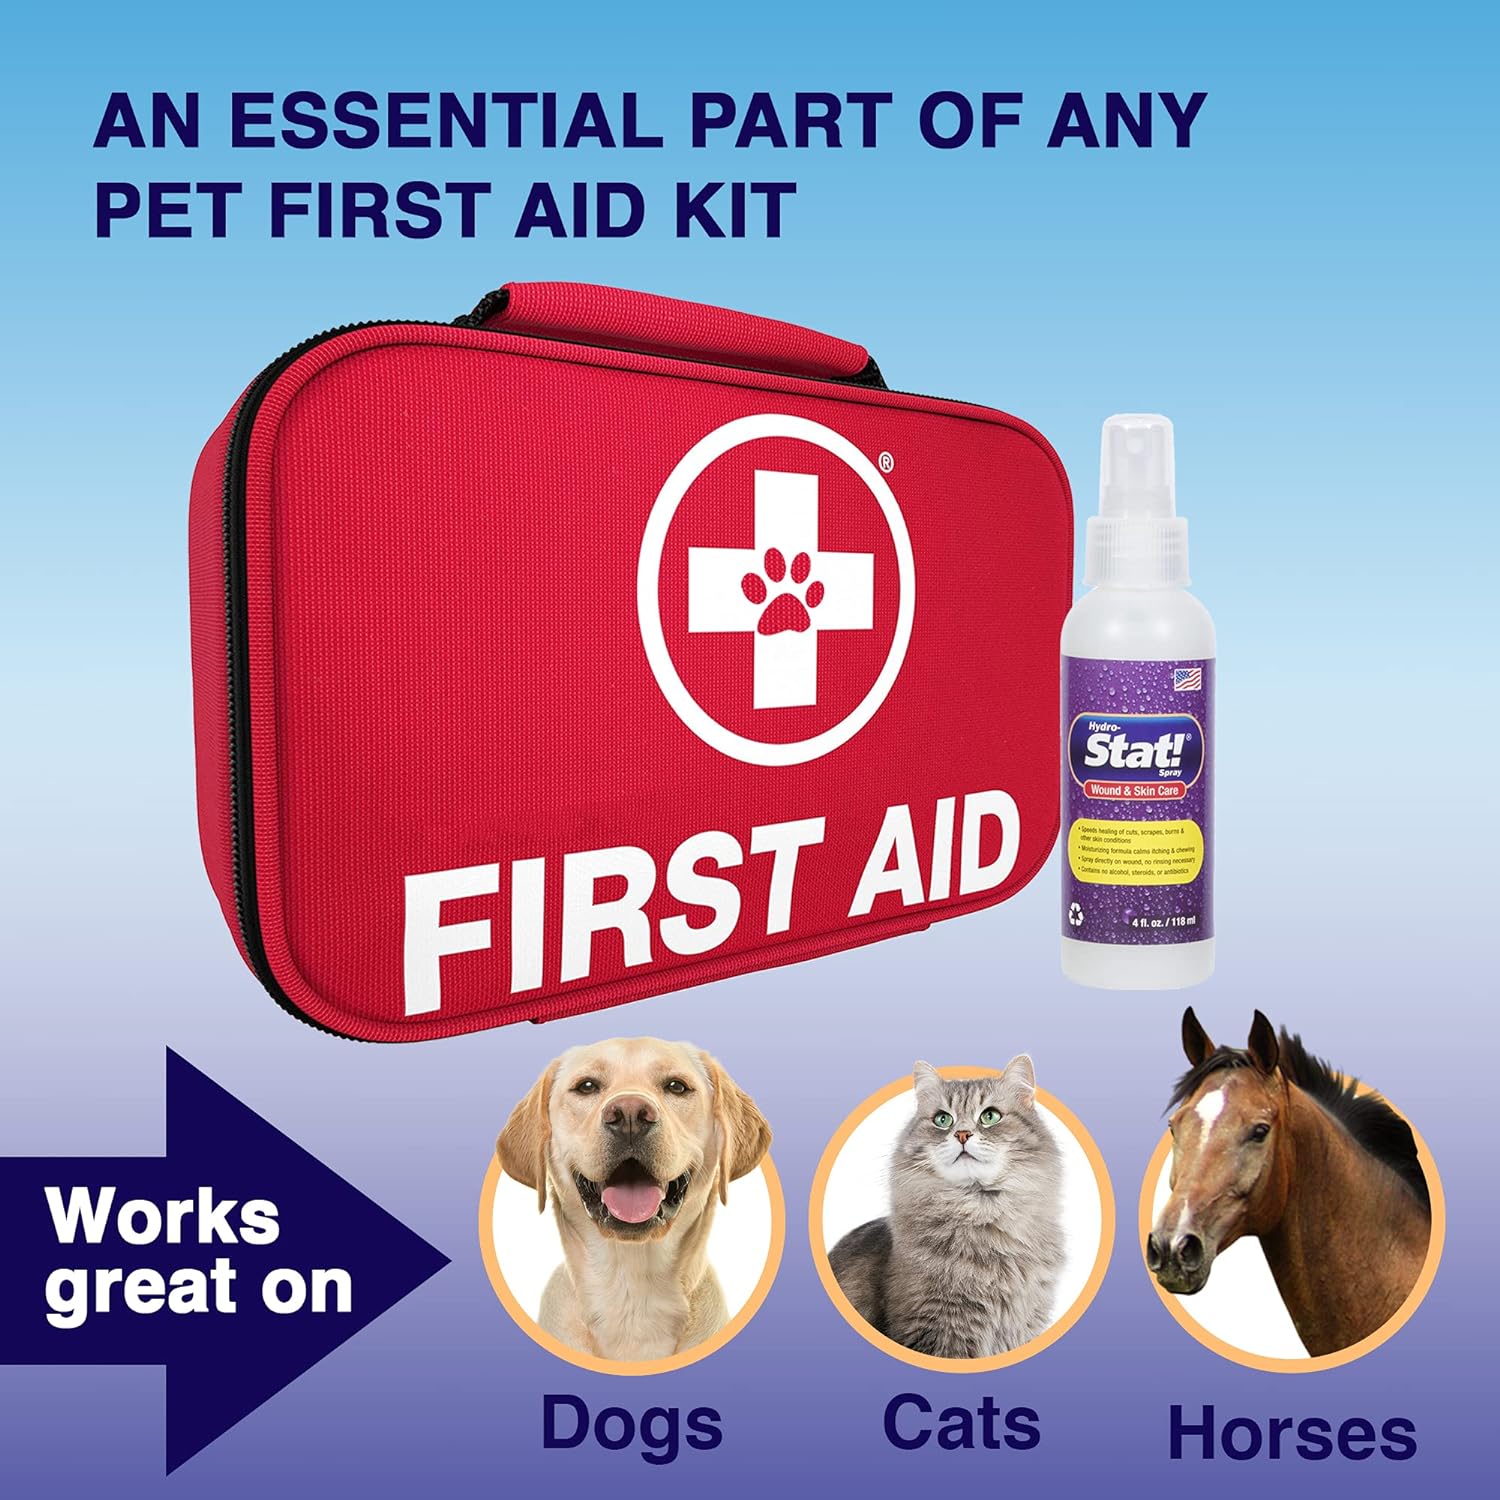 Stat! Spray Pet Wound & Skin Care | First-Aid Treatment for Dogs, Cats, Horses | Natural Plant Based Ingredients | Speeds Healing of Cuts, Burns, Hot Spots, Skin Allergies | Soothing Anti-Itch Formula : Pet Supplies